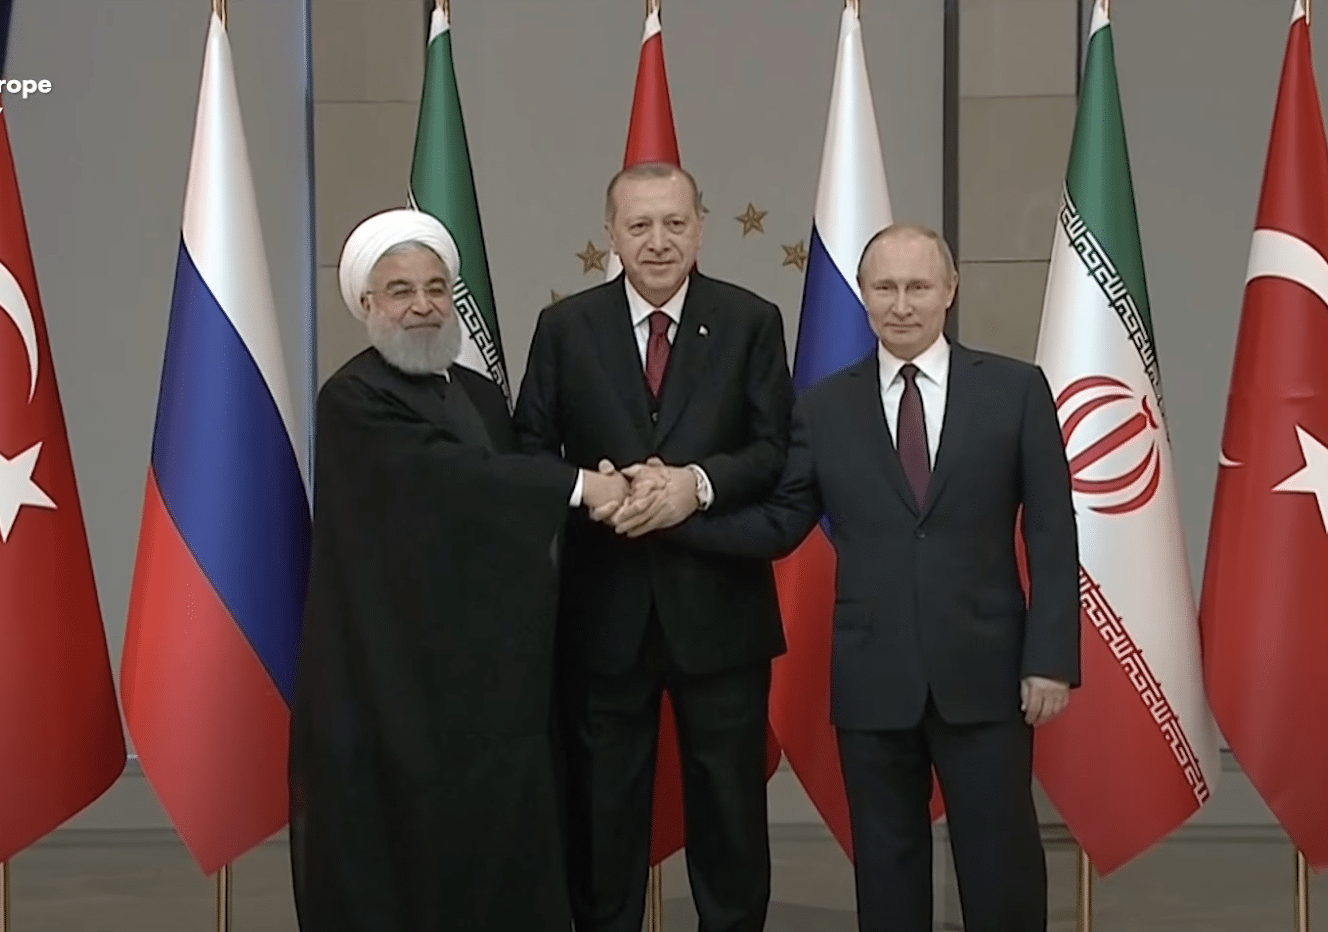 PROPHECY WATCH: Russia still working on ‘historic’ meeting with Turkey, Iran and Syria